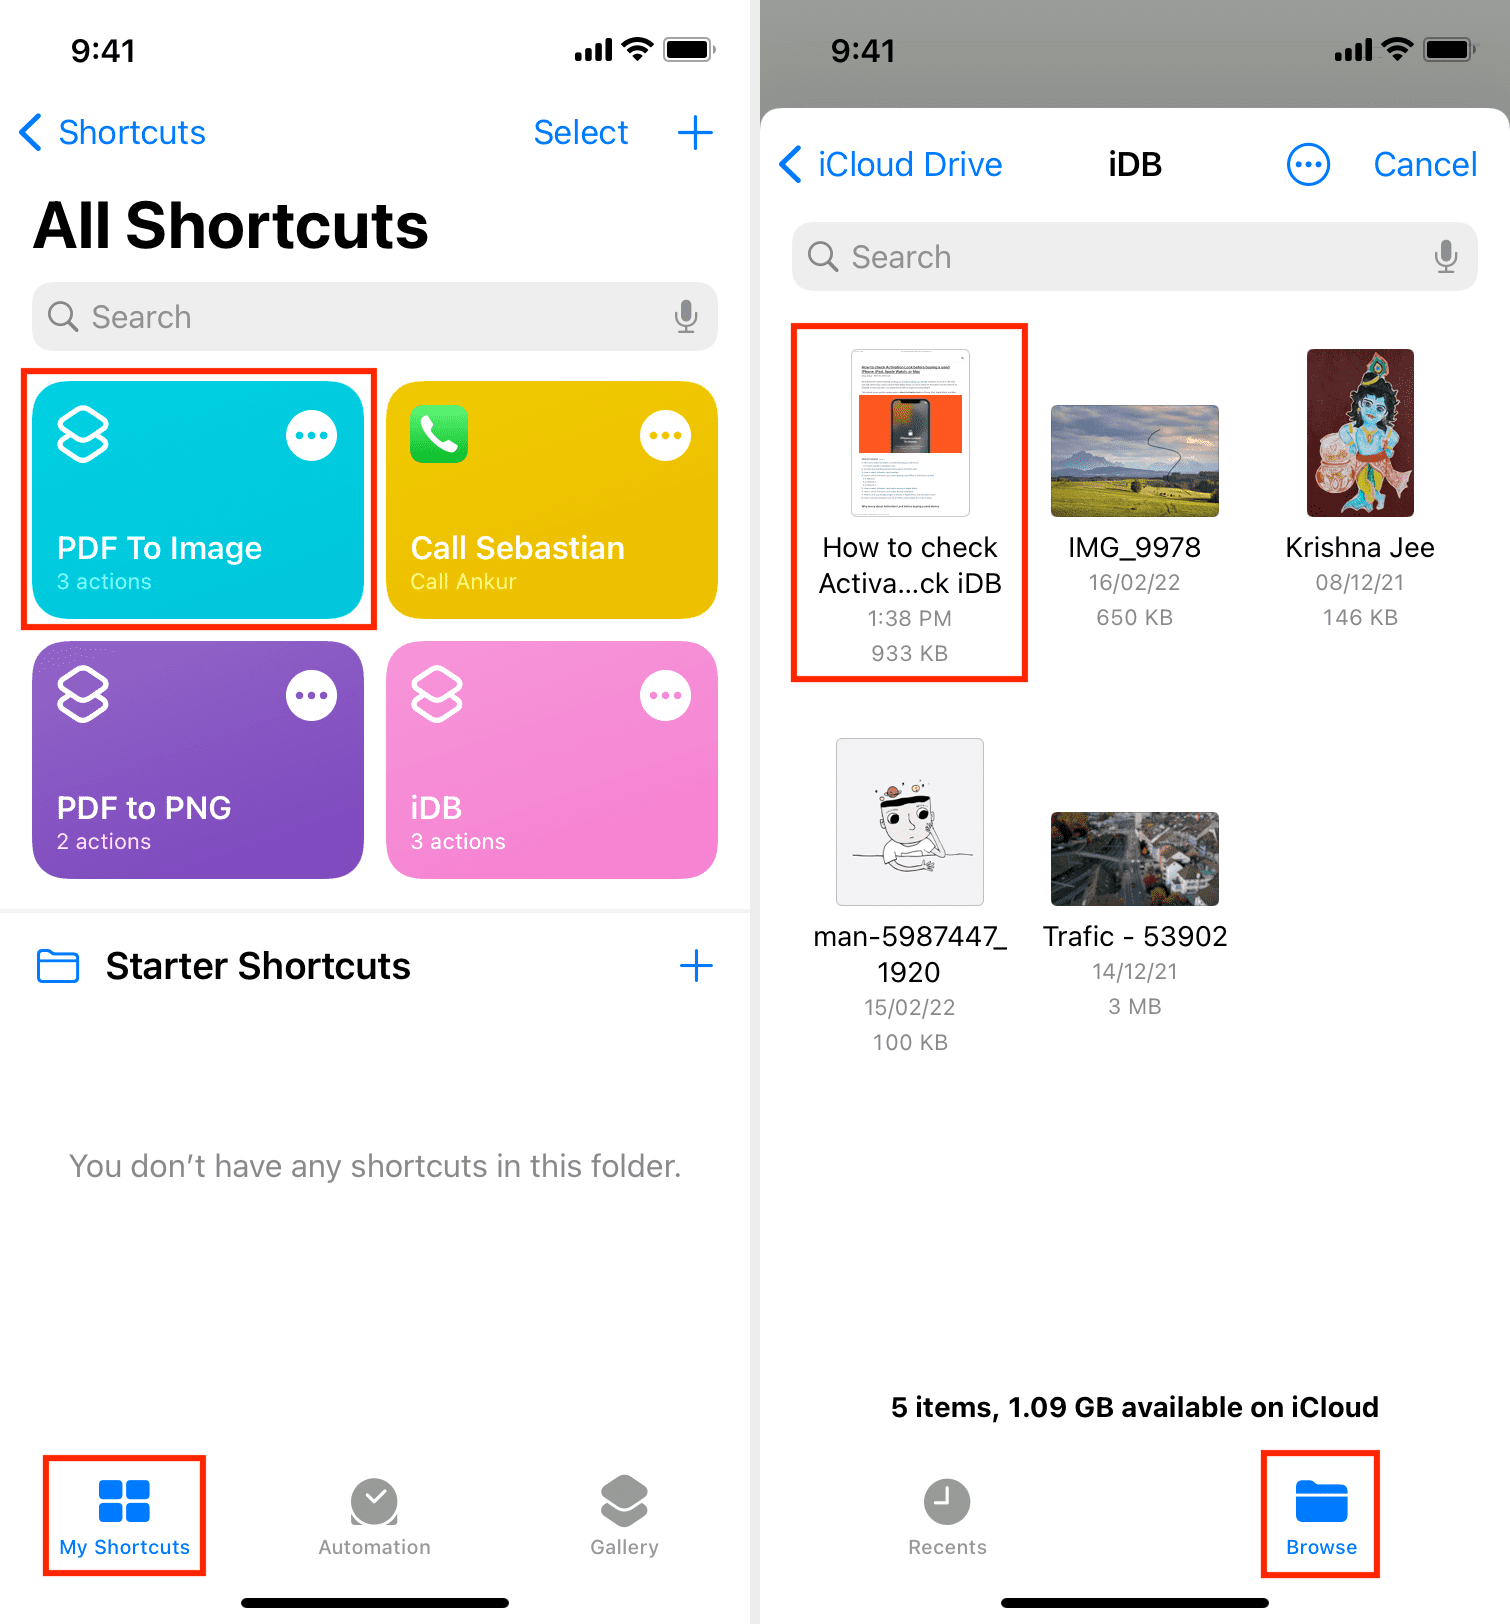 PDF To Image iOS Shortcut on iPhone to convert PDF to JPG or PNG